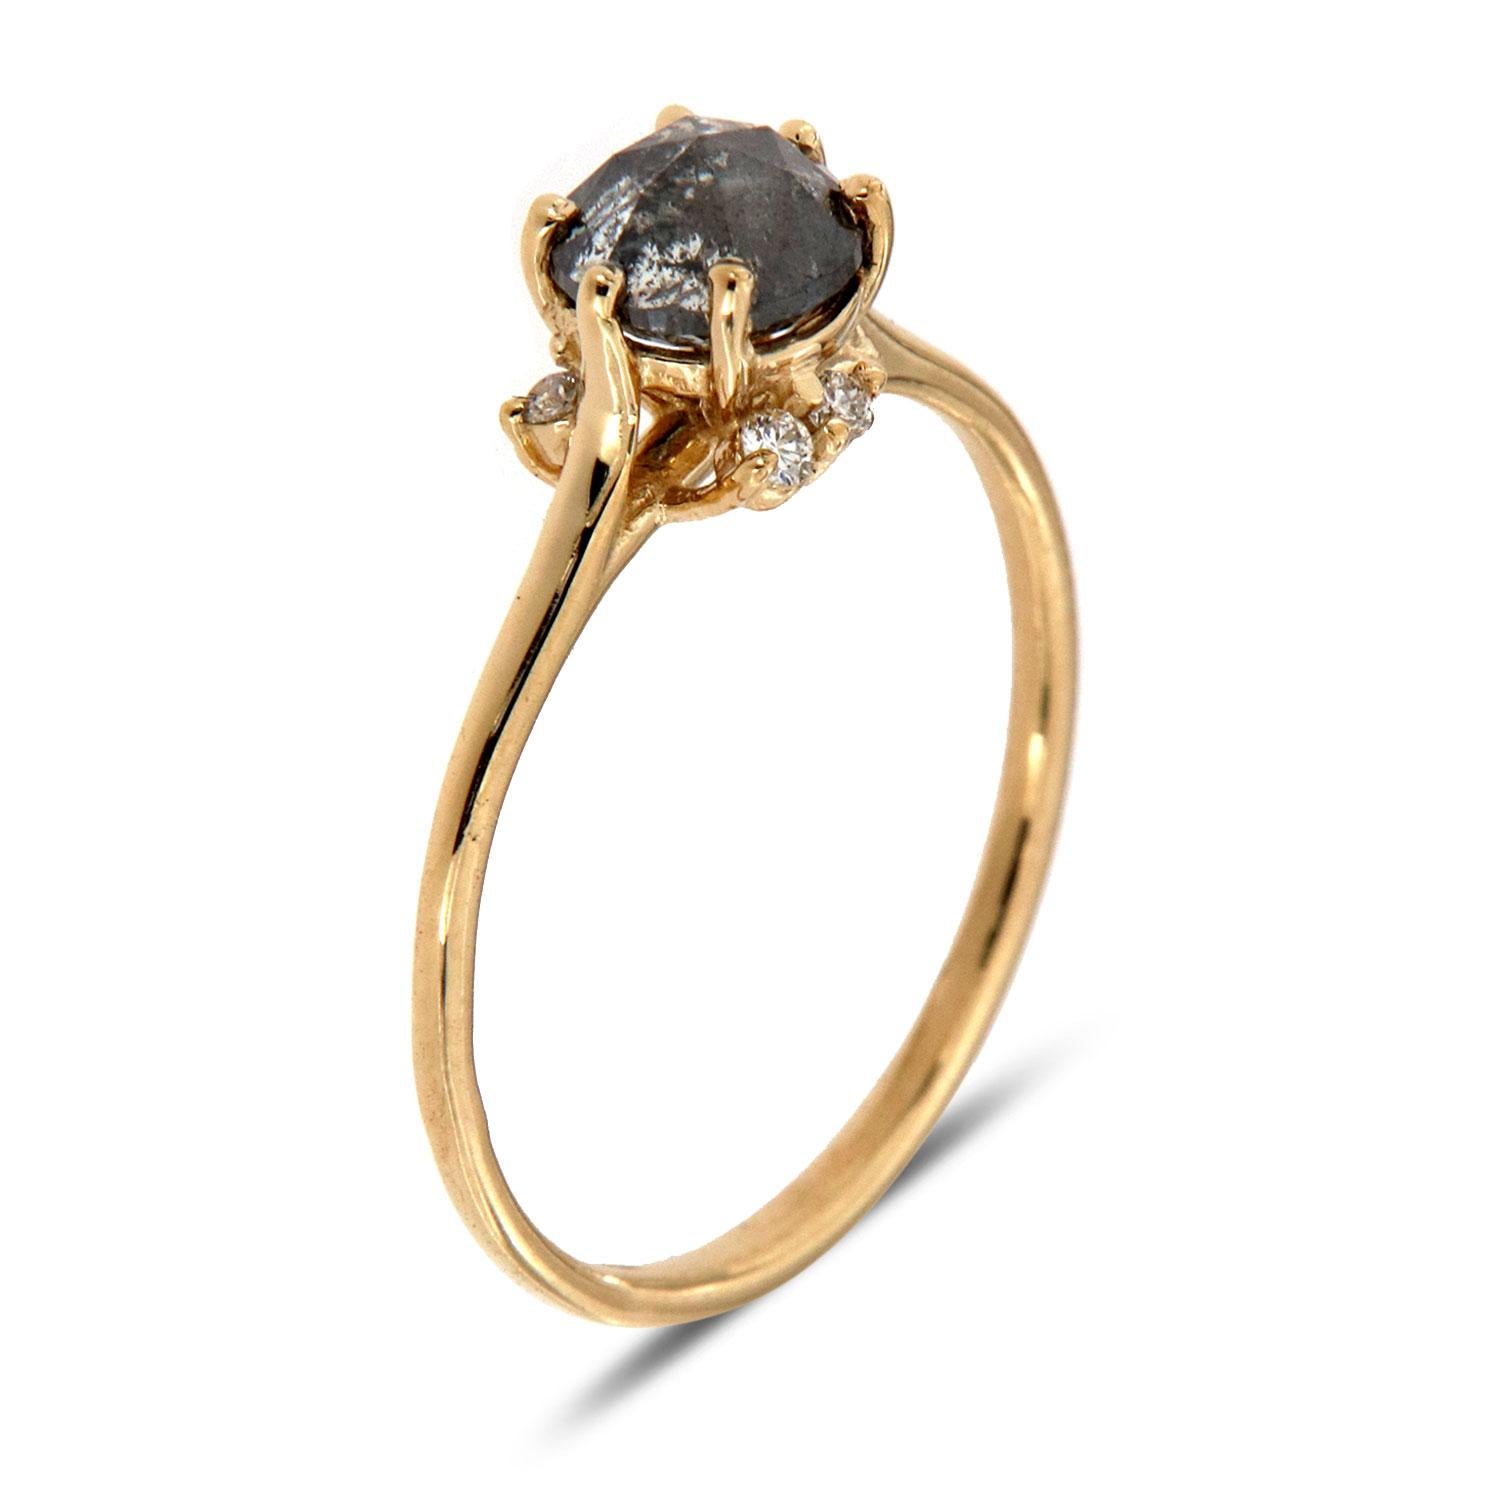 This earthy-designed ring features a 0.75 Carat Salt and Pepper round diamond set between Six (6) tiny prongs. Four(4) round brilliants diamonds unevenly scattered underneath its crown create the ultimate organically feel. The ring sizable and can